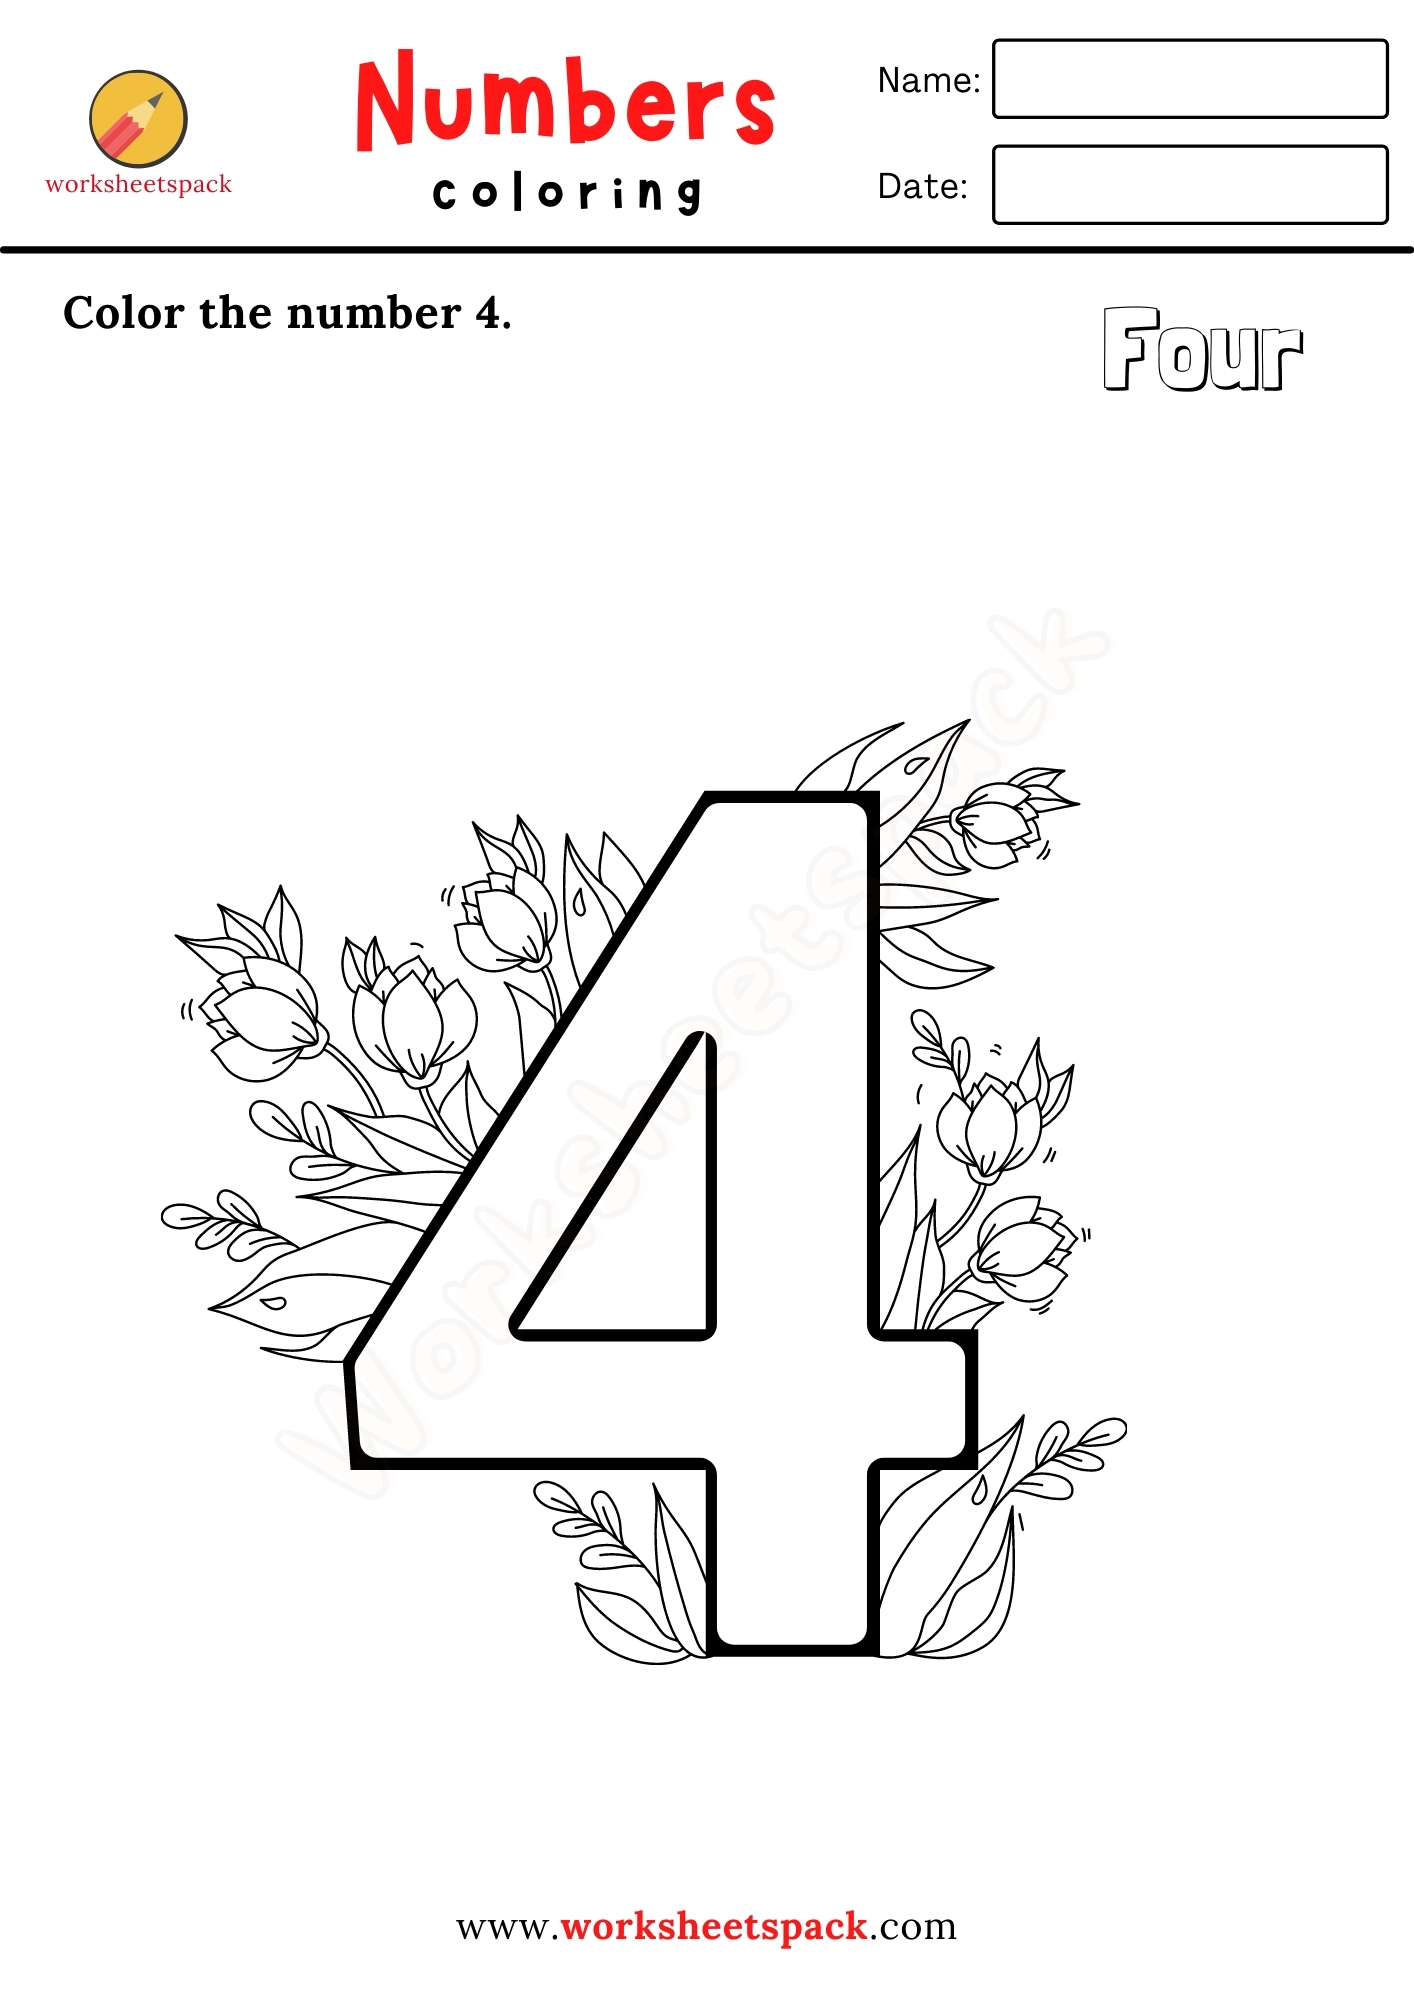 color-the-numbers-1-5-worksheets-for-toddlers-worksheetspack